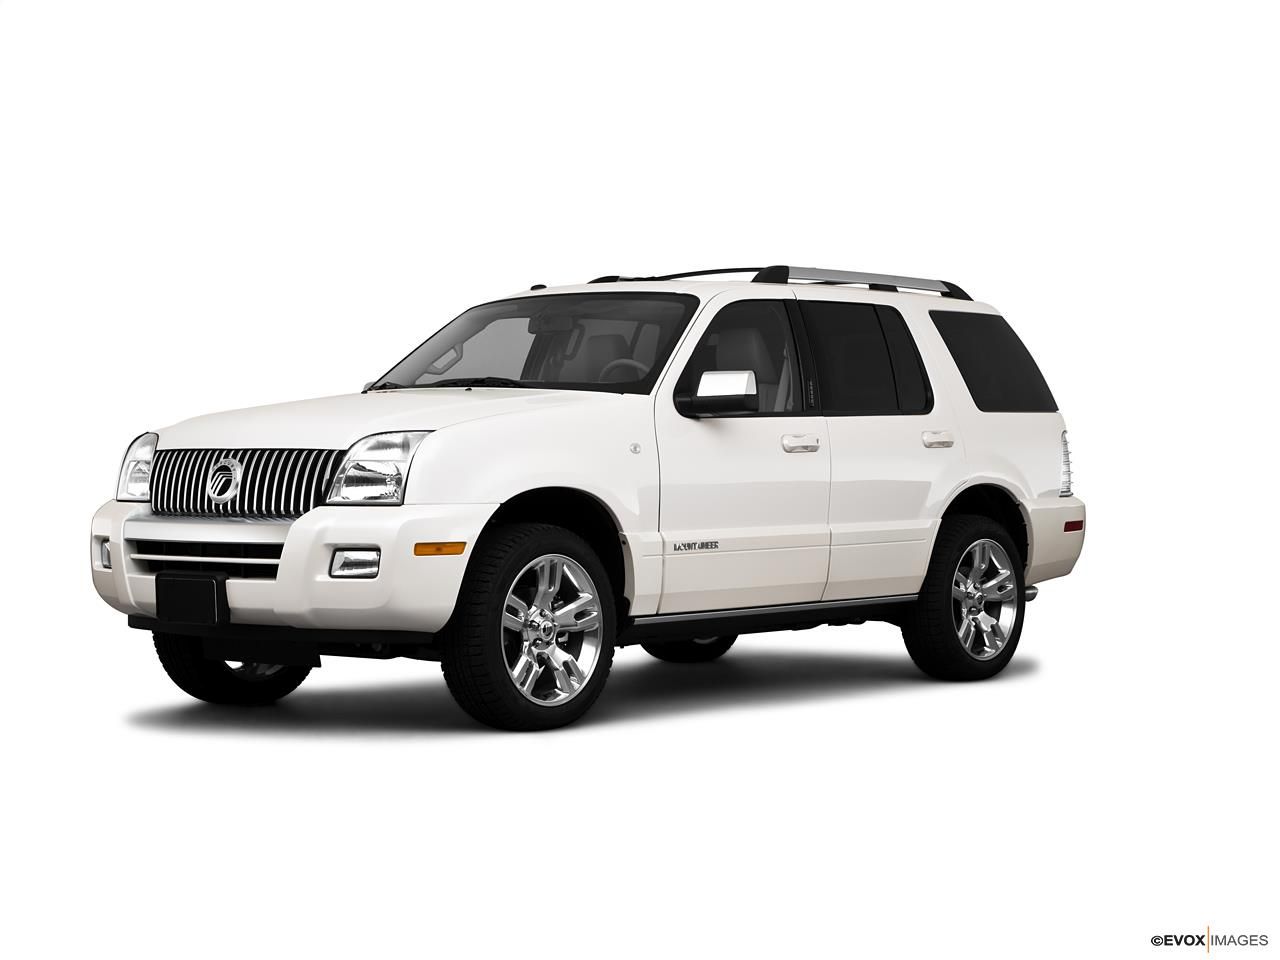 2010 Mercury Mountaineer Research, Photos, Specs and Expertise | CarMax